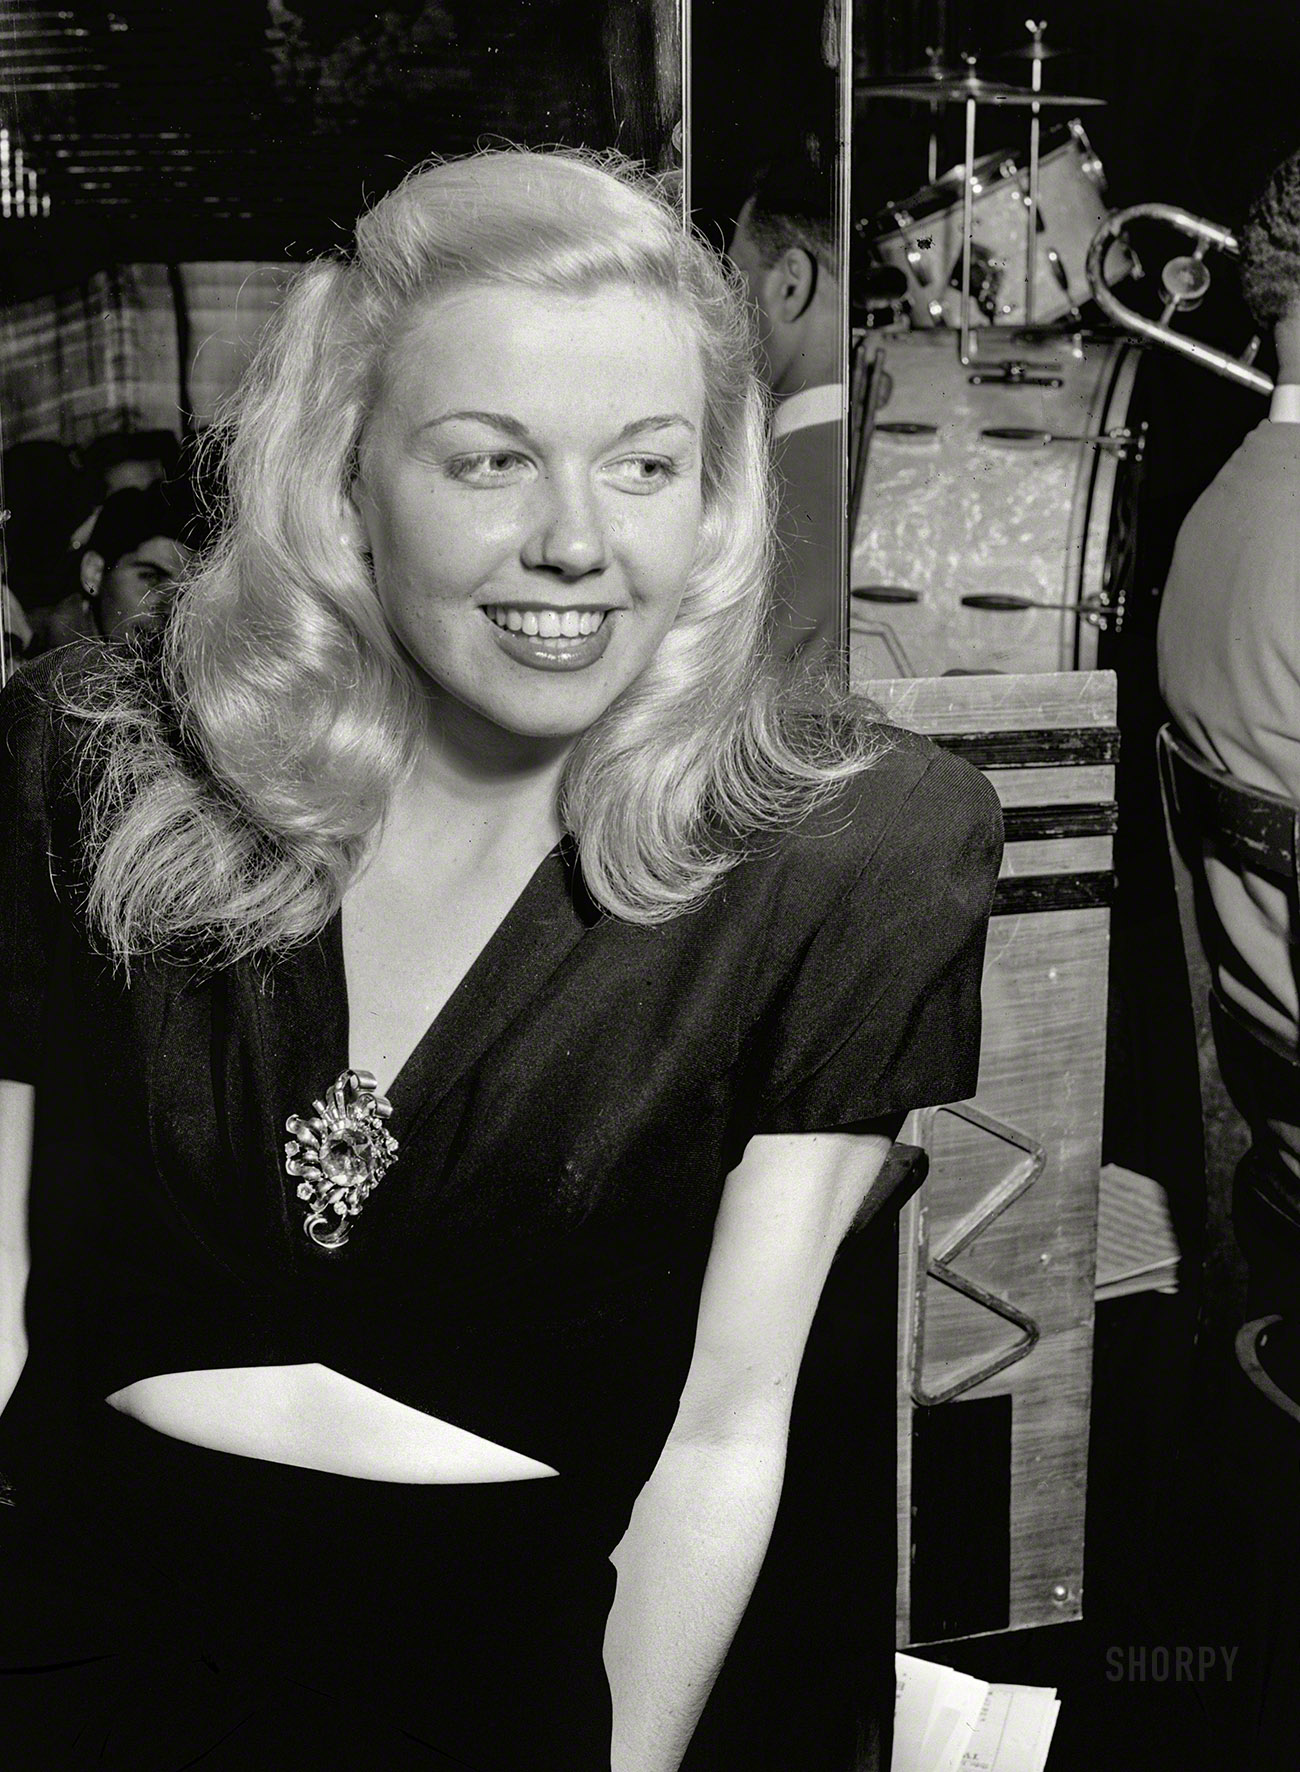 July 1946. New York. "Doris Day at the Aquarium, jazz club on Seventh Avenue." Medium format negative by William Gottlieb for Down Beat. View full size.